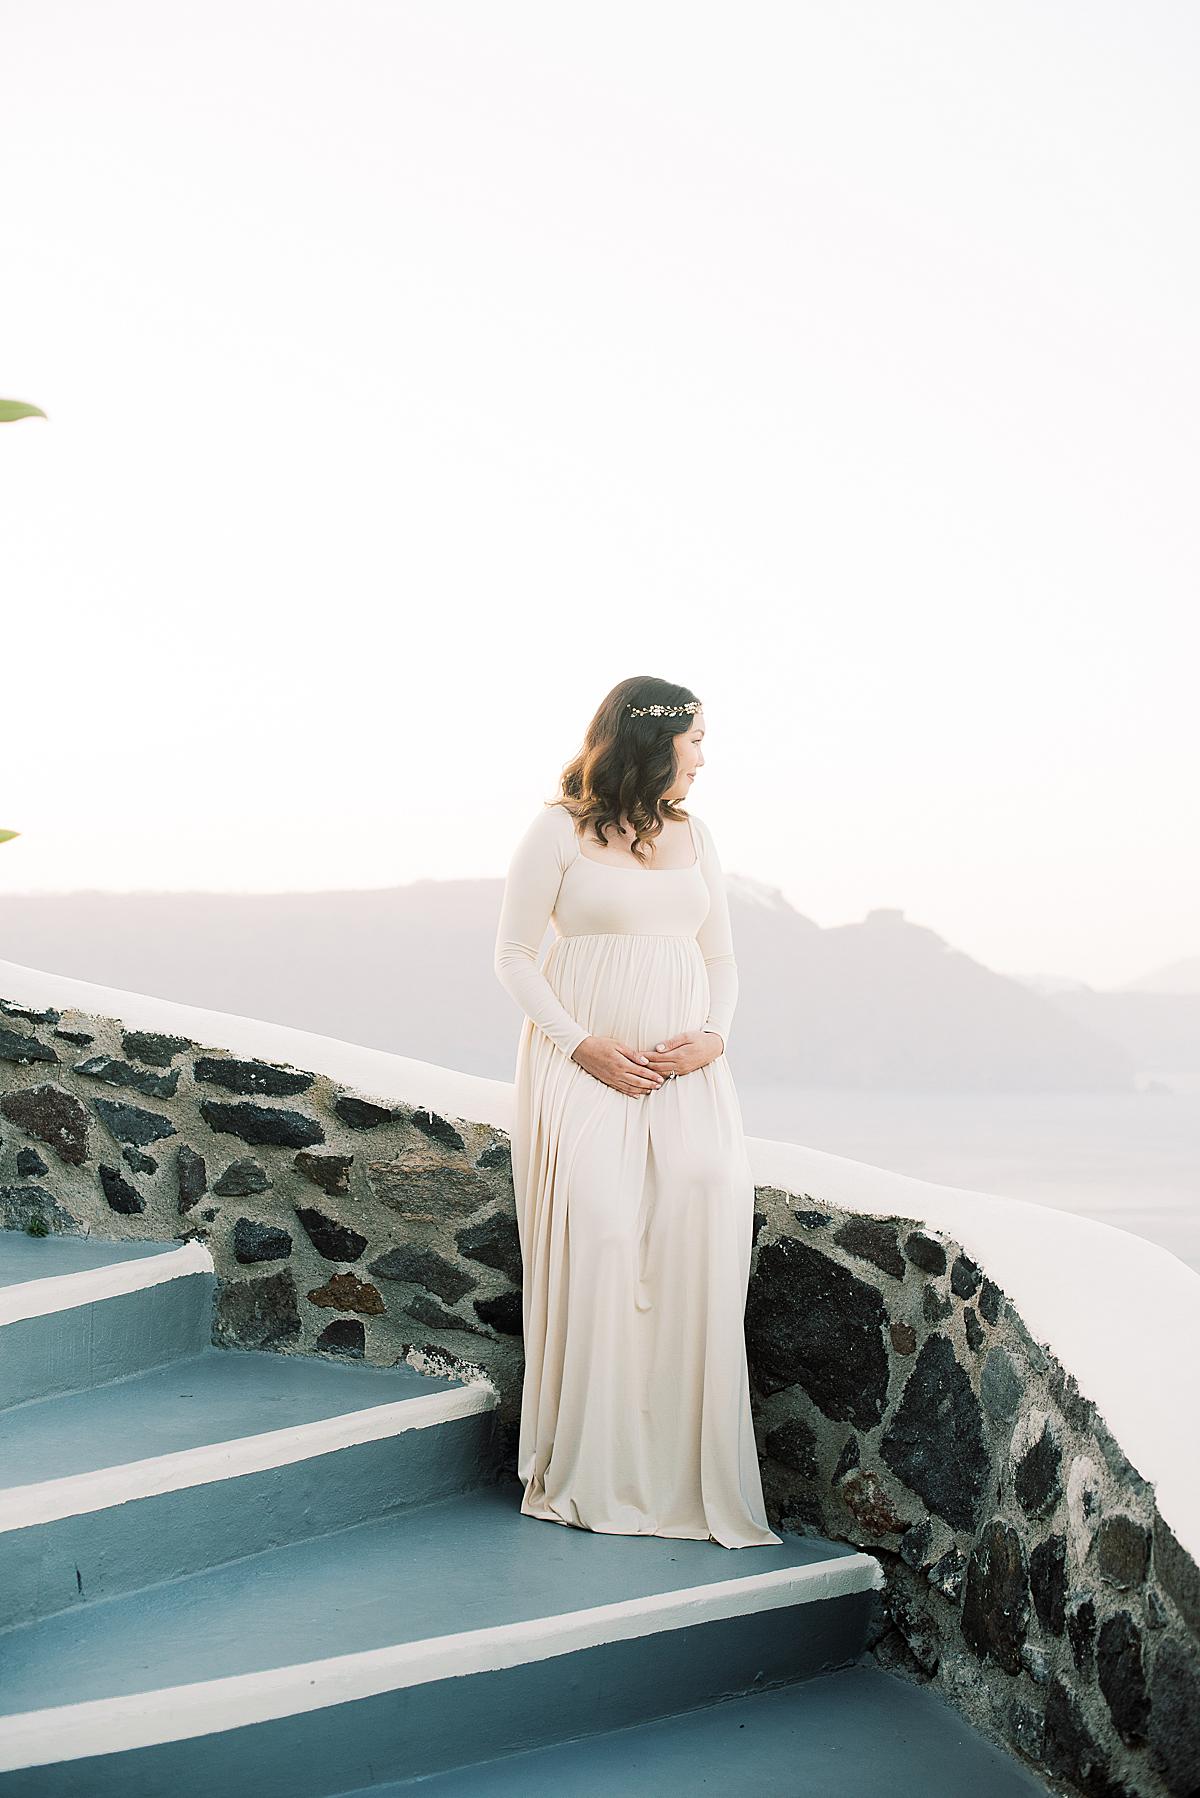 maternity session at canaves oia santorini